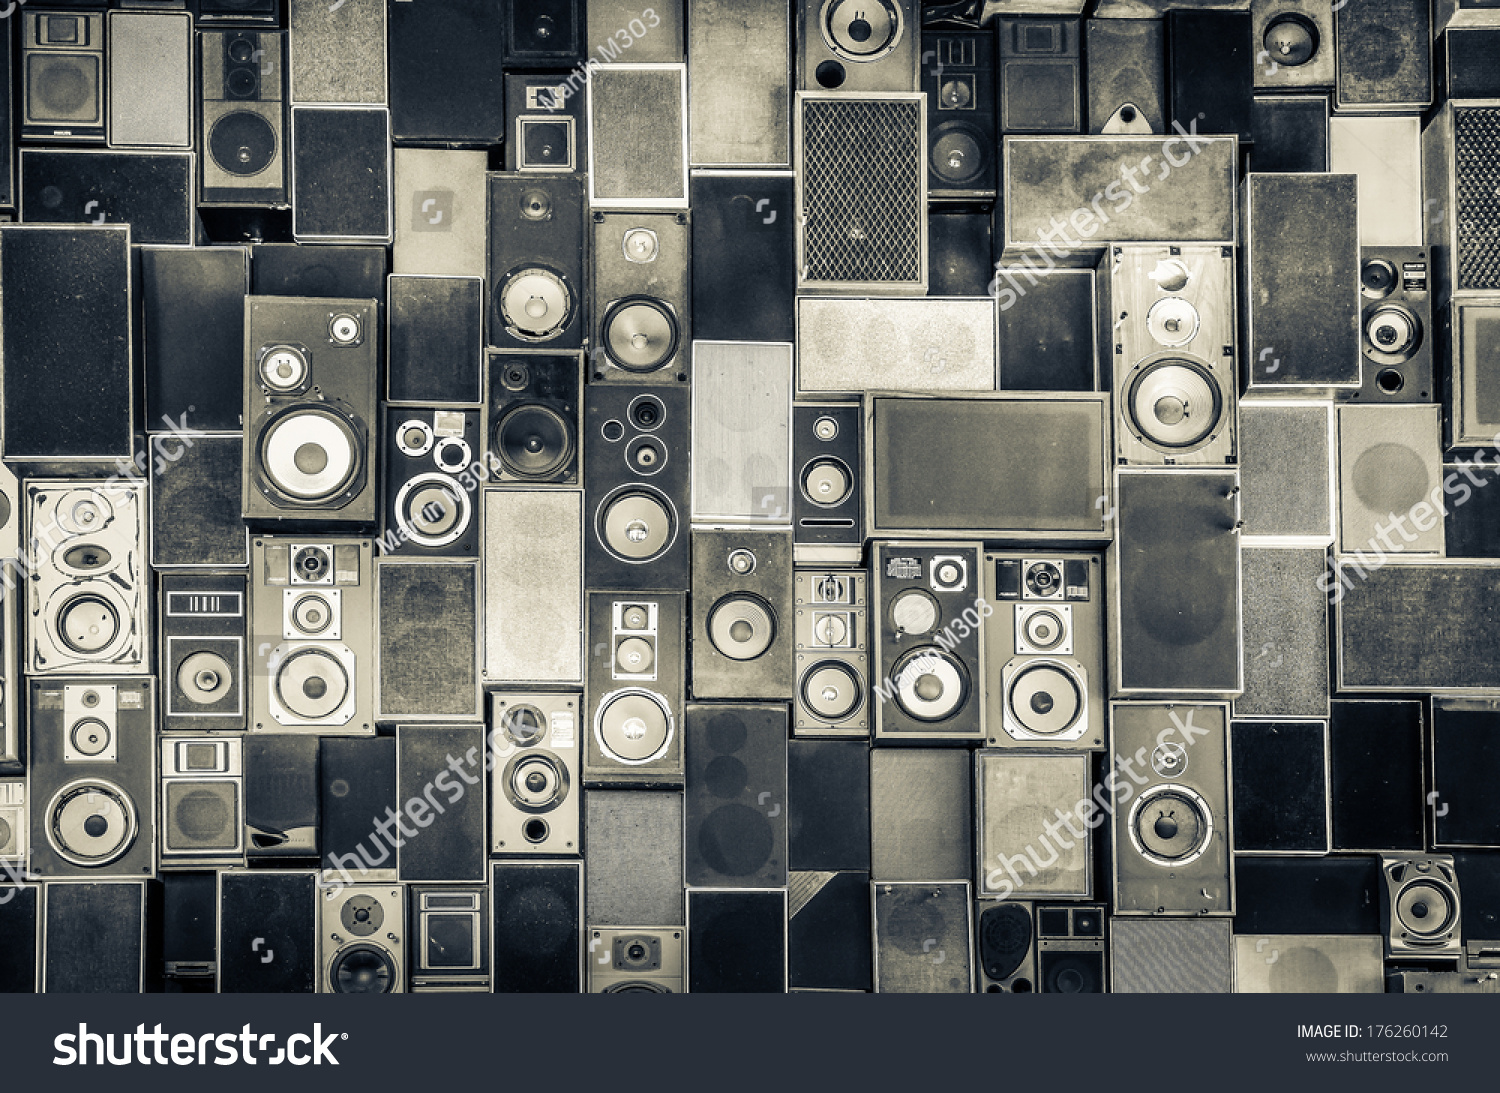 Music sound speakers hanging on the wall in monochrome vintage style #176260142